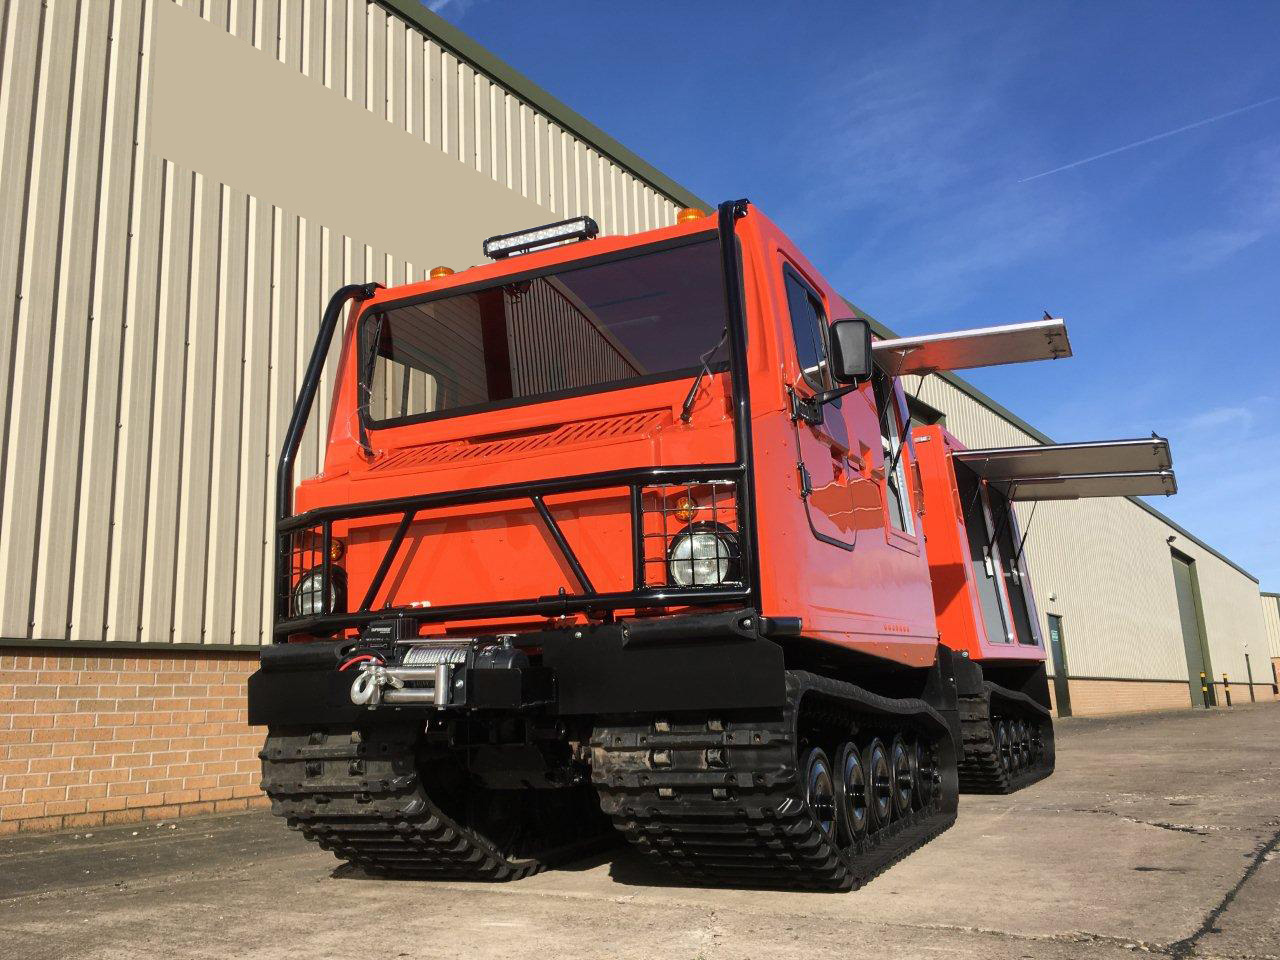 military vehicles for sale - <a href='/index.php/main-menu-stock/hagglund-bv206/models-available/50253-hagglund-bv206-multi-purpose-vehicle' title='Read more...' class='joodb_titletink'>Hagglund BV206 Multi-Purpose Vehicle</a>